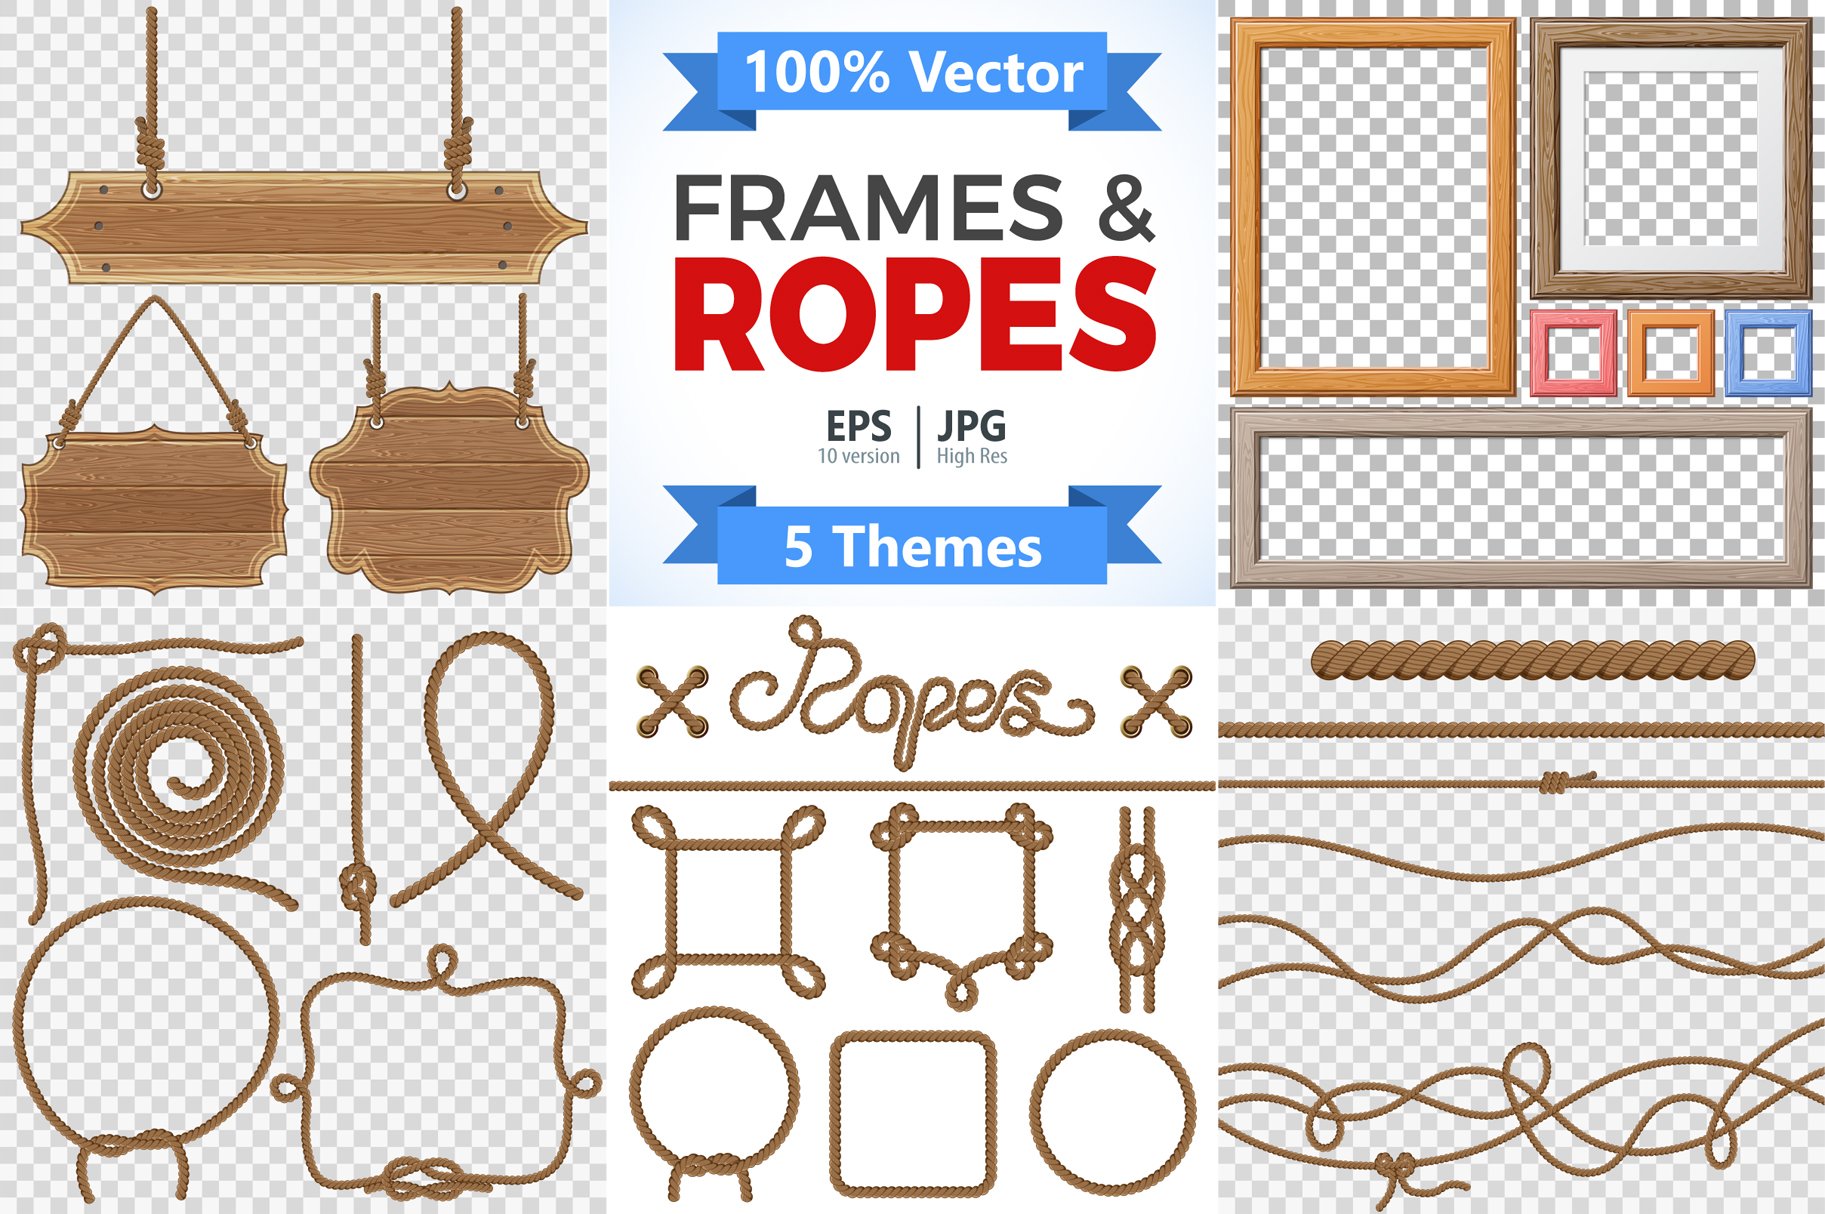 Collect Wooden Frames, Ropes, Knots cover image.